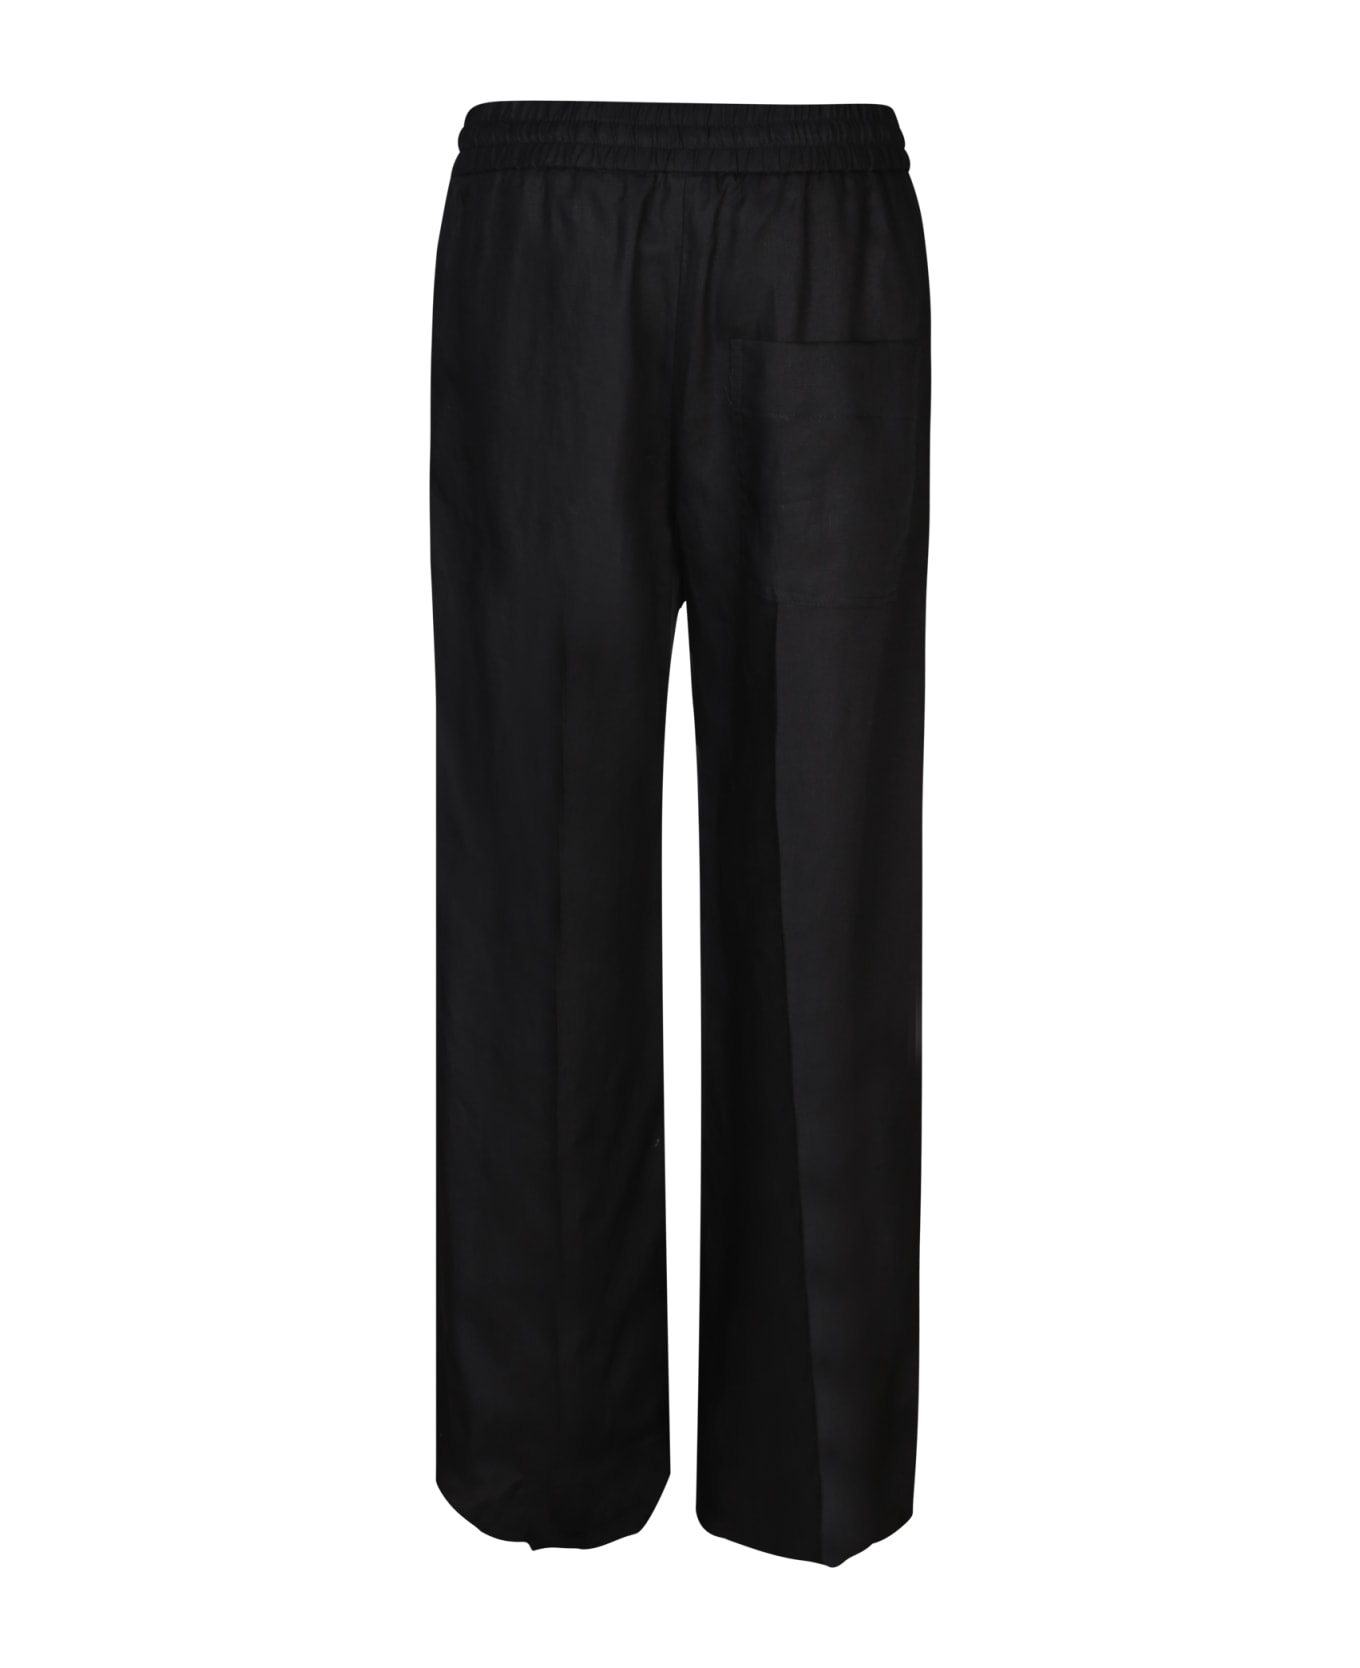 Paul Smith Wide-fit Black Trousers - Black